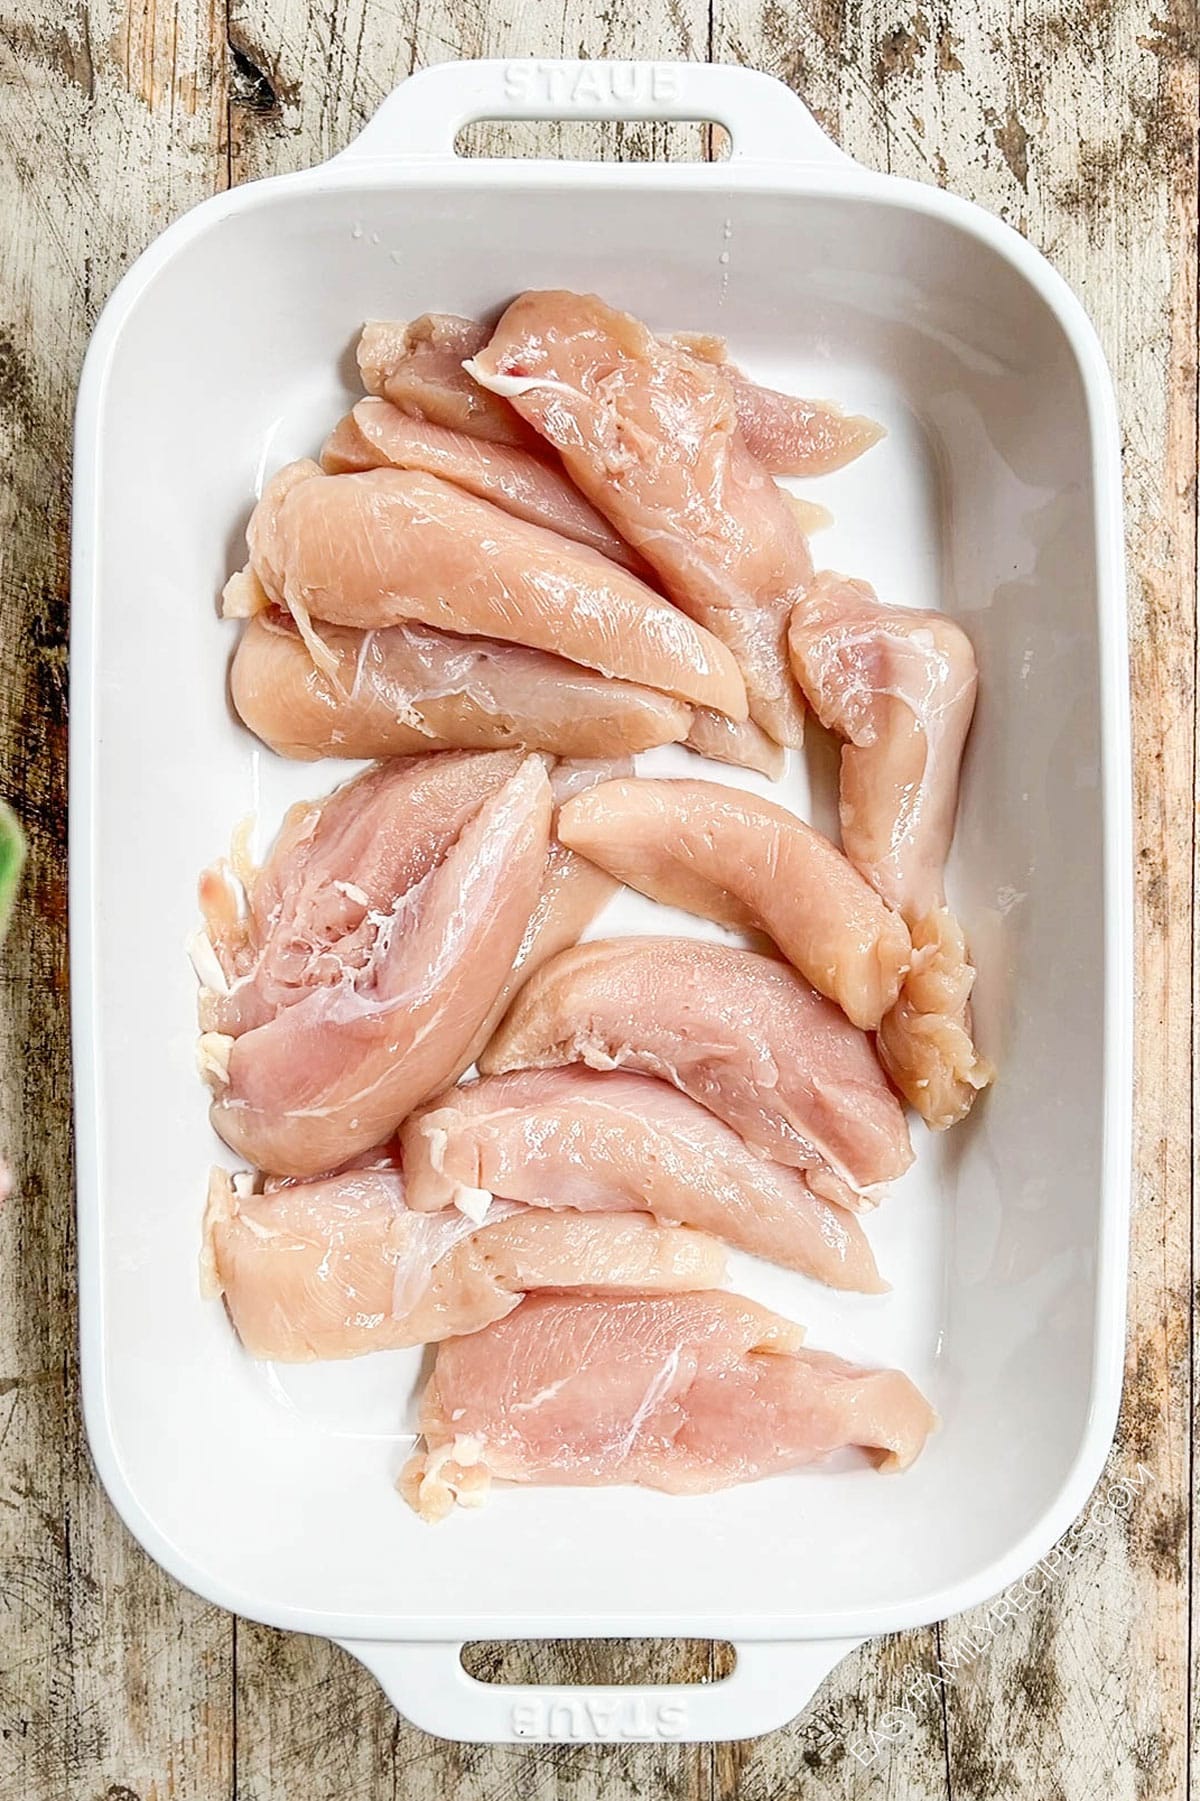 Chicken for oven-baked tenders is placed in a casserole dish.